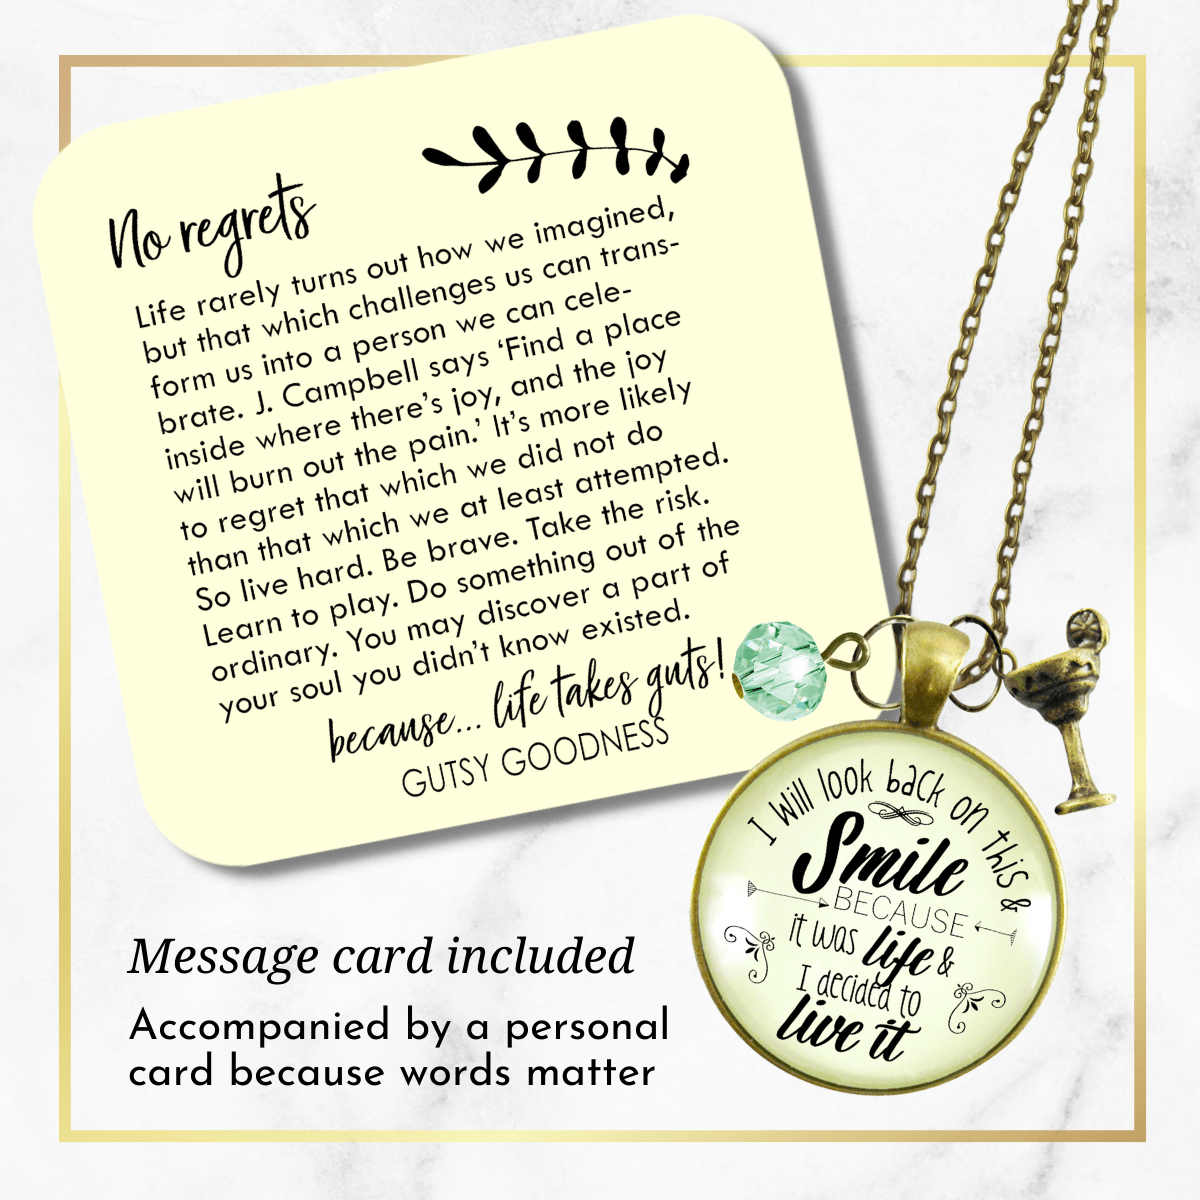 Gutsy Goodness Margarita Necklace I Will Look Back Smile Hipster Style Quote Jewelry - Gutsy Goodness;Margarita Necklace I Will Look Back Smile Hipster Style Quote Jewelry - Gutsy Goodness Handmade Jewelry Gifts